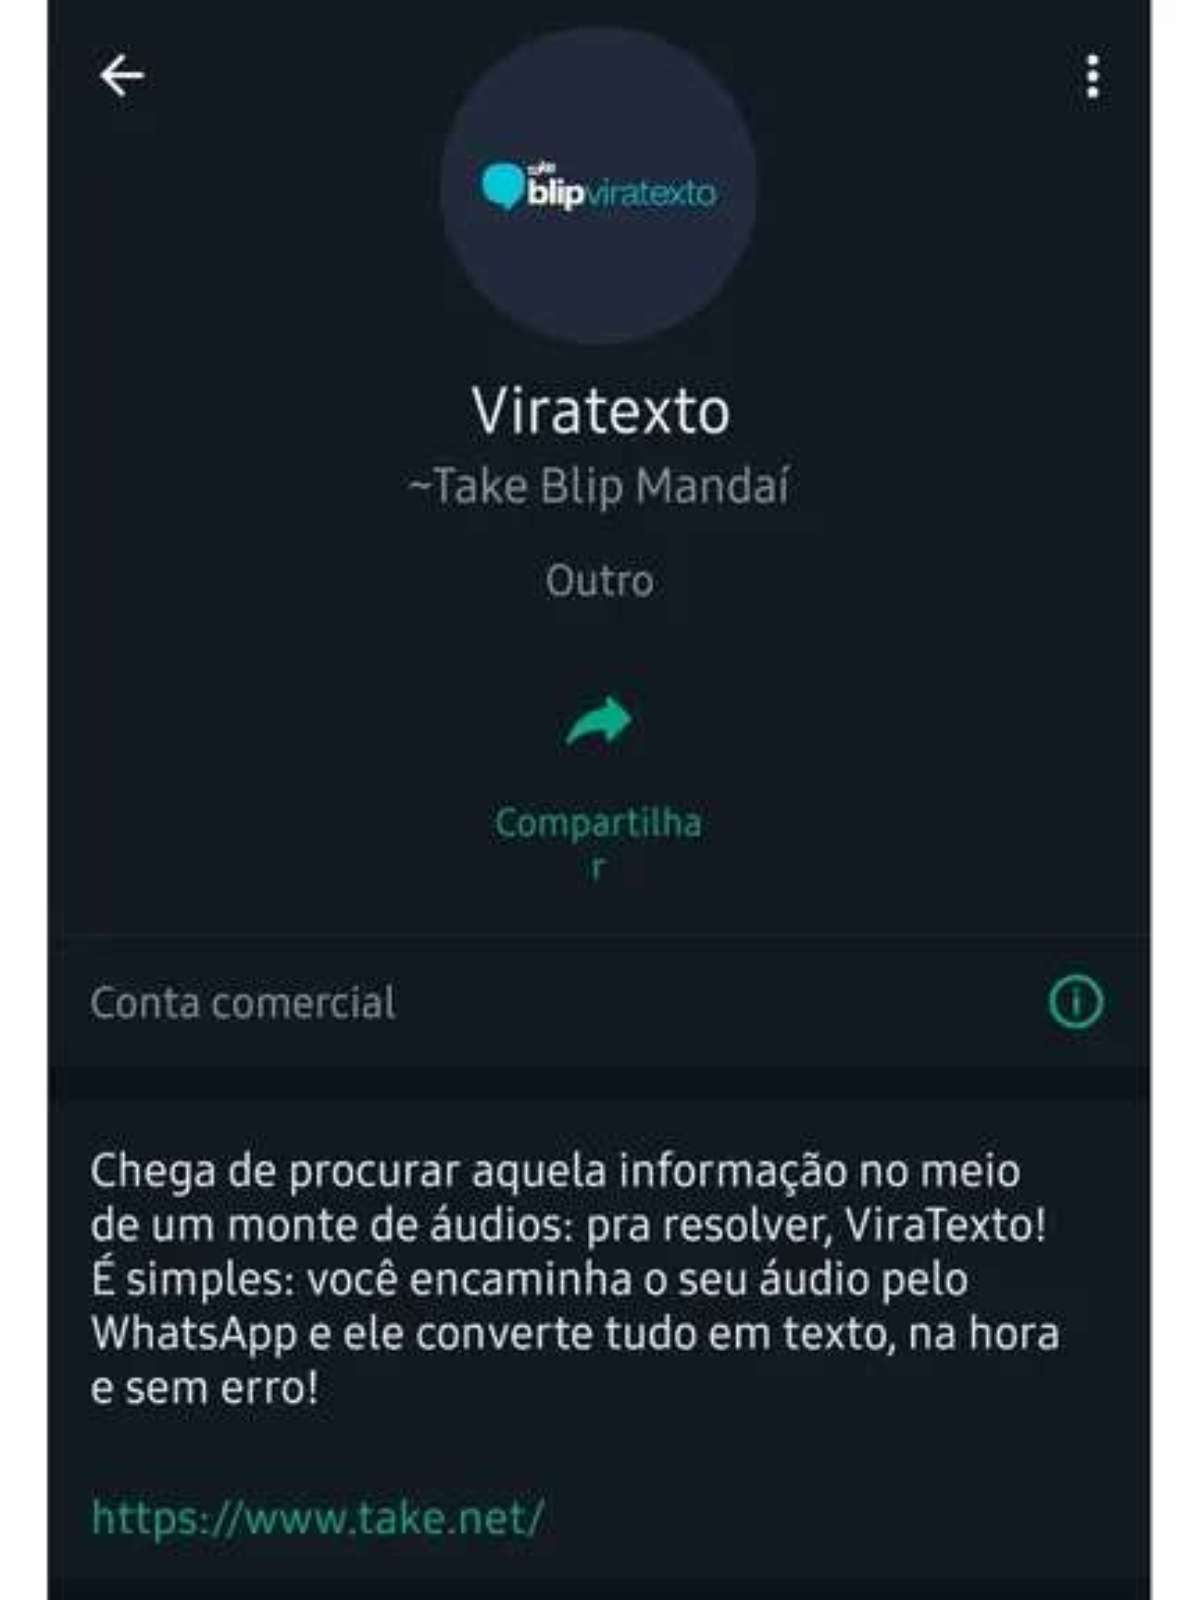 DTMF: sabe o que significa? - Nvoip - Voz, Chat, Whatsapp e Bots.